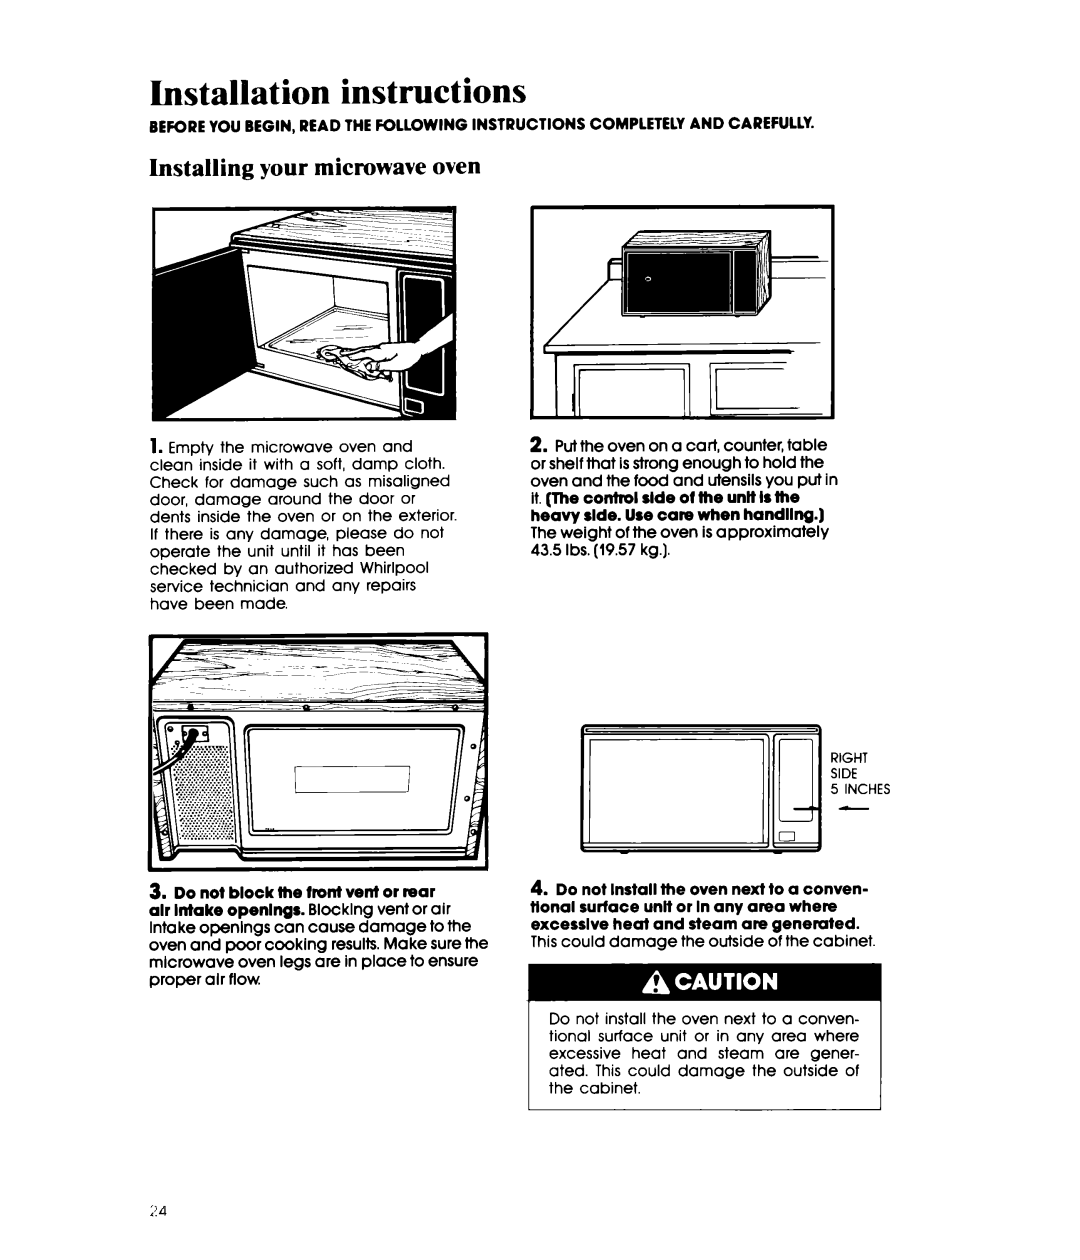 Whirlpool MW3601XW, MW3600XW manual Installation instructions, Installing your microwave oven 